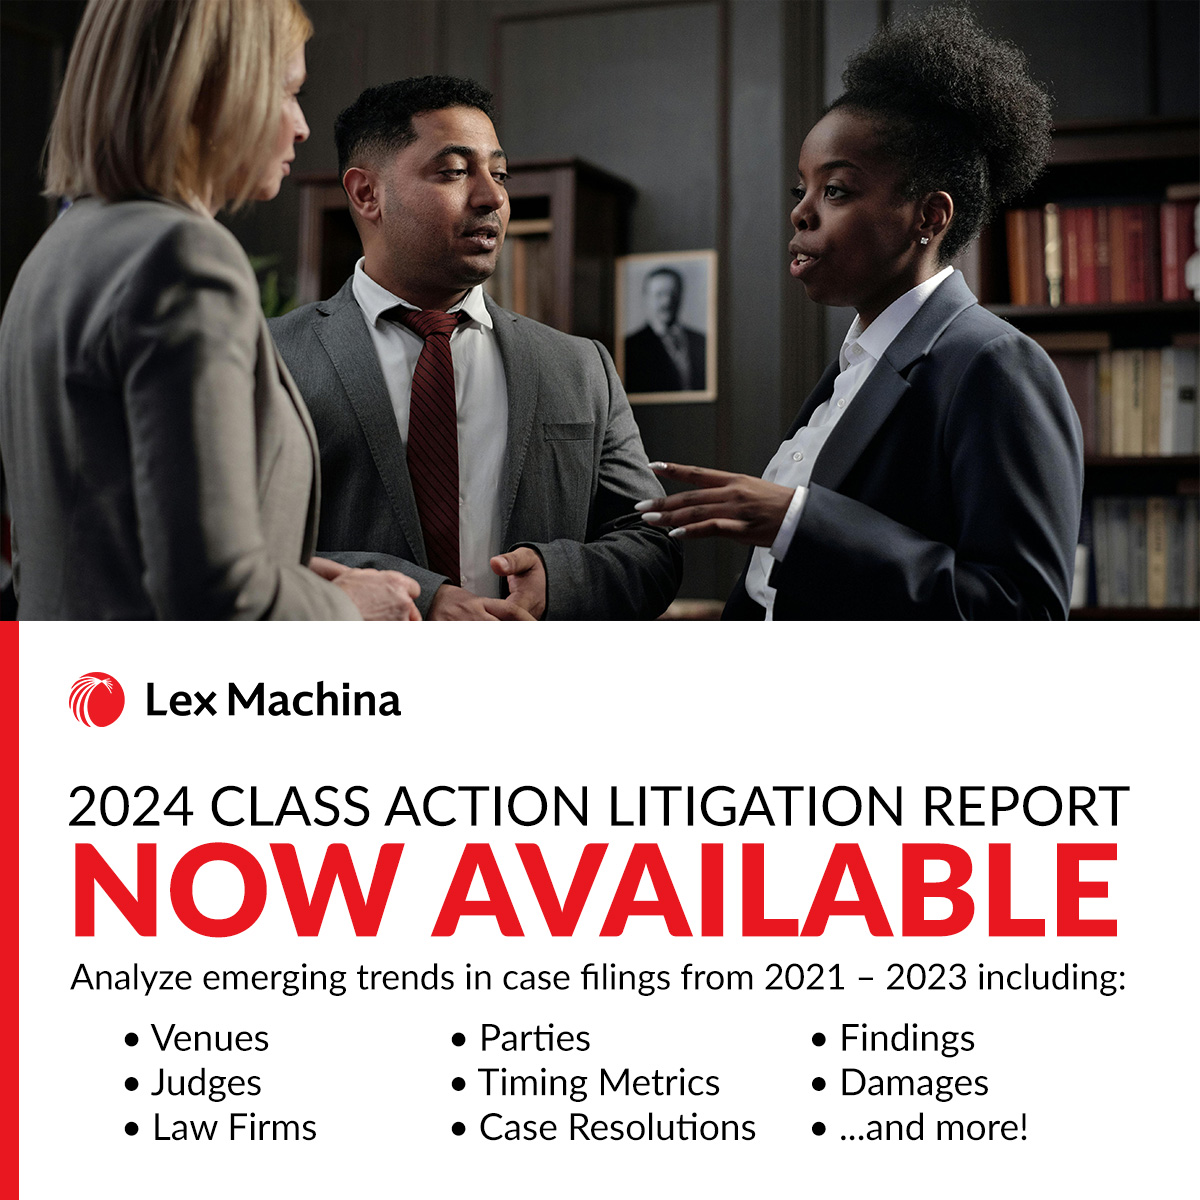 Discover trends from 2021-2023 in federal courts, venues, judges, and more in the latest @LexMachina Class Action Litigation report! Get valuable insights tailored to your practice area and interests. bit.ly/4b69zFX #LexMachina #ClassAction #Litigation #LegalTech